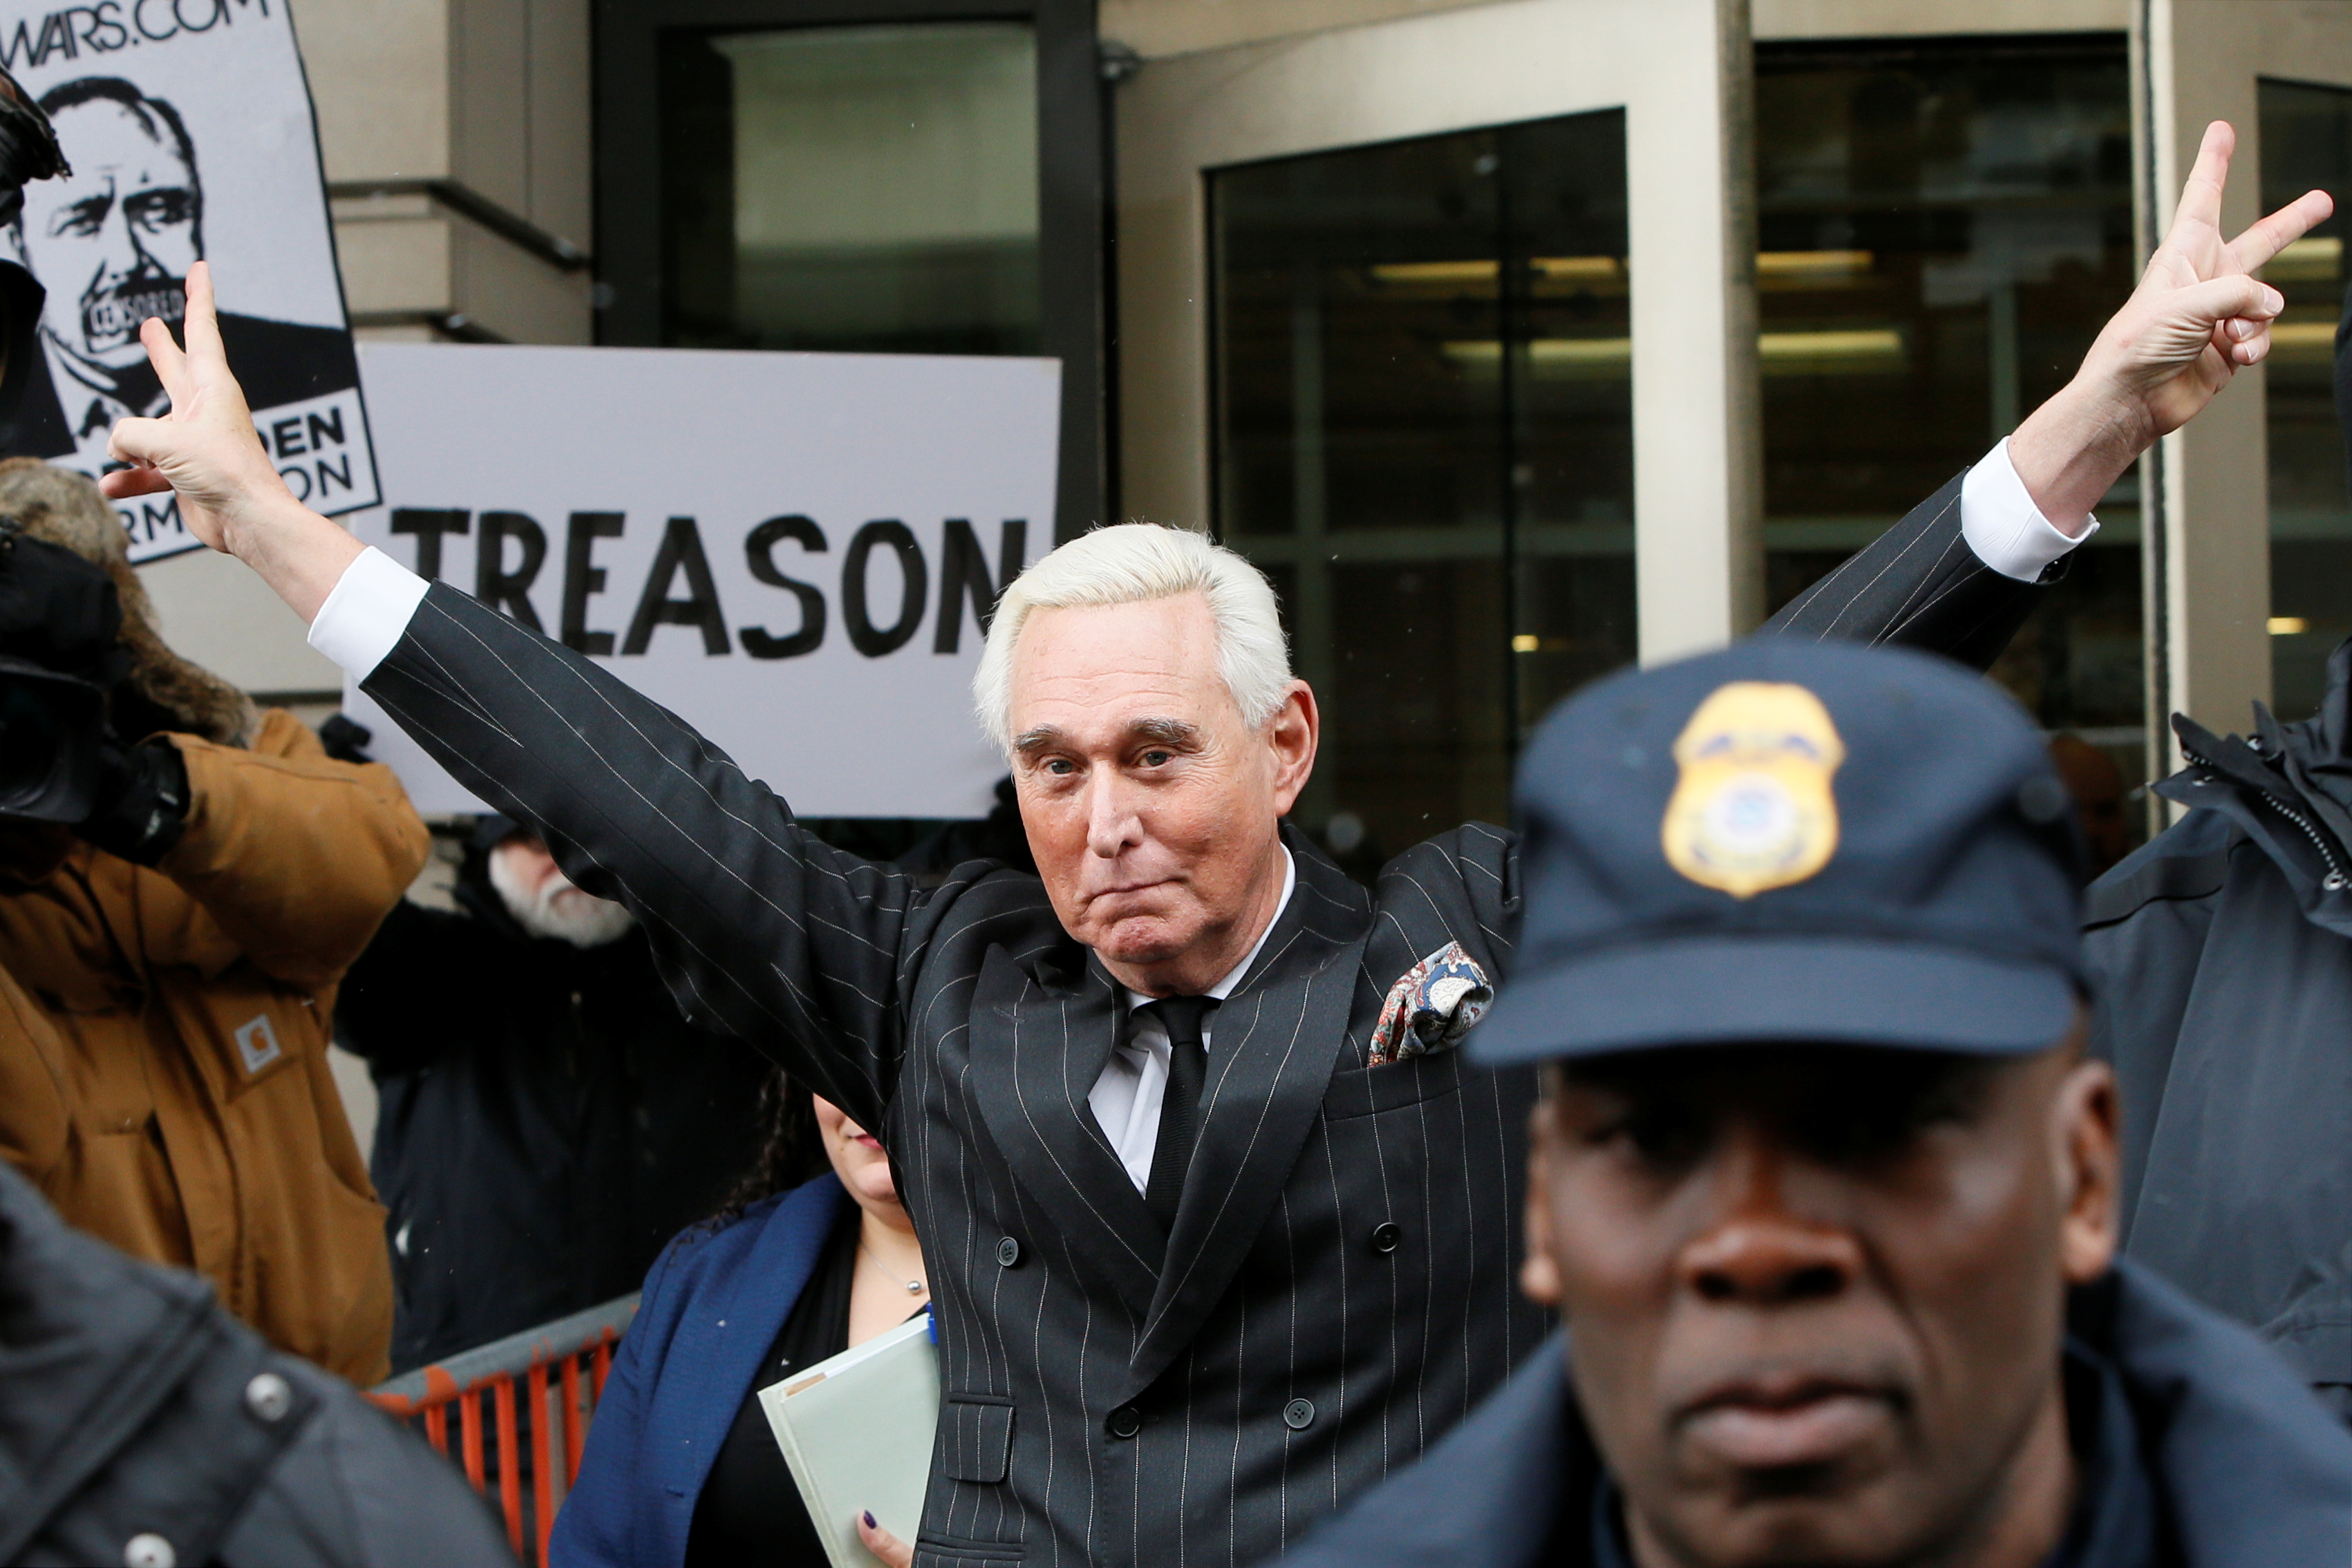 Roger Stone, longtime political ally of U.S. President Donald Trump, flashes a victory gesture as he departs following a status conference in the criminal case against him brought by Special Counsel Robert Mueller at U.S. District Court in Washington, U.S., Feb.1, 2019. REUTERS/Jim Bourg 